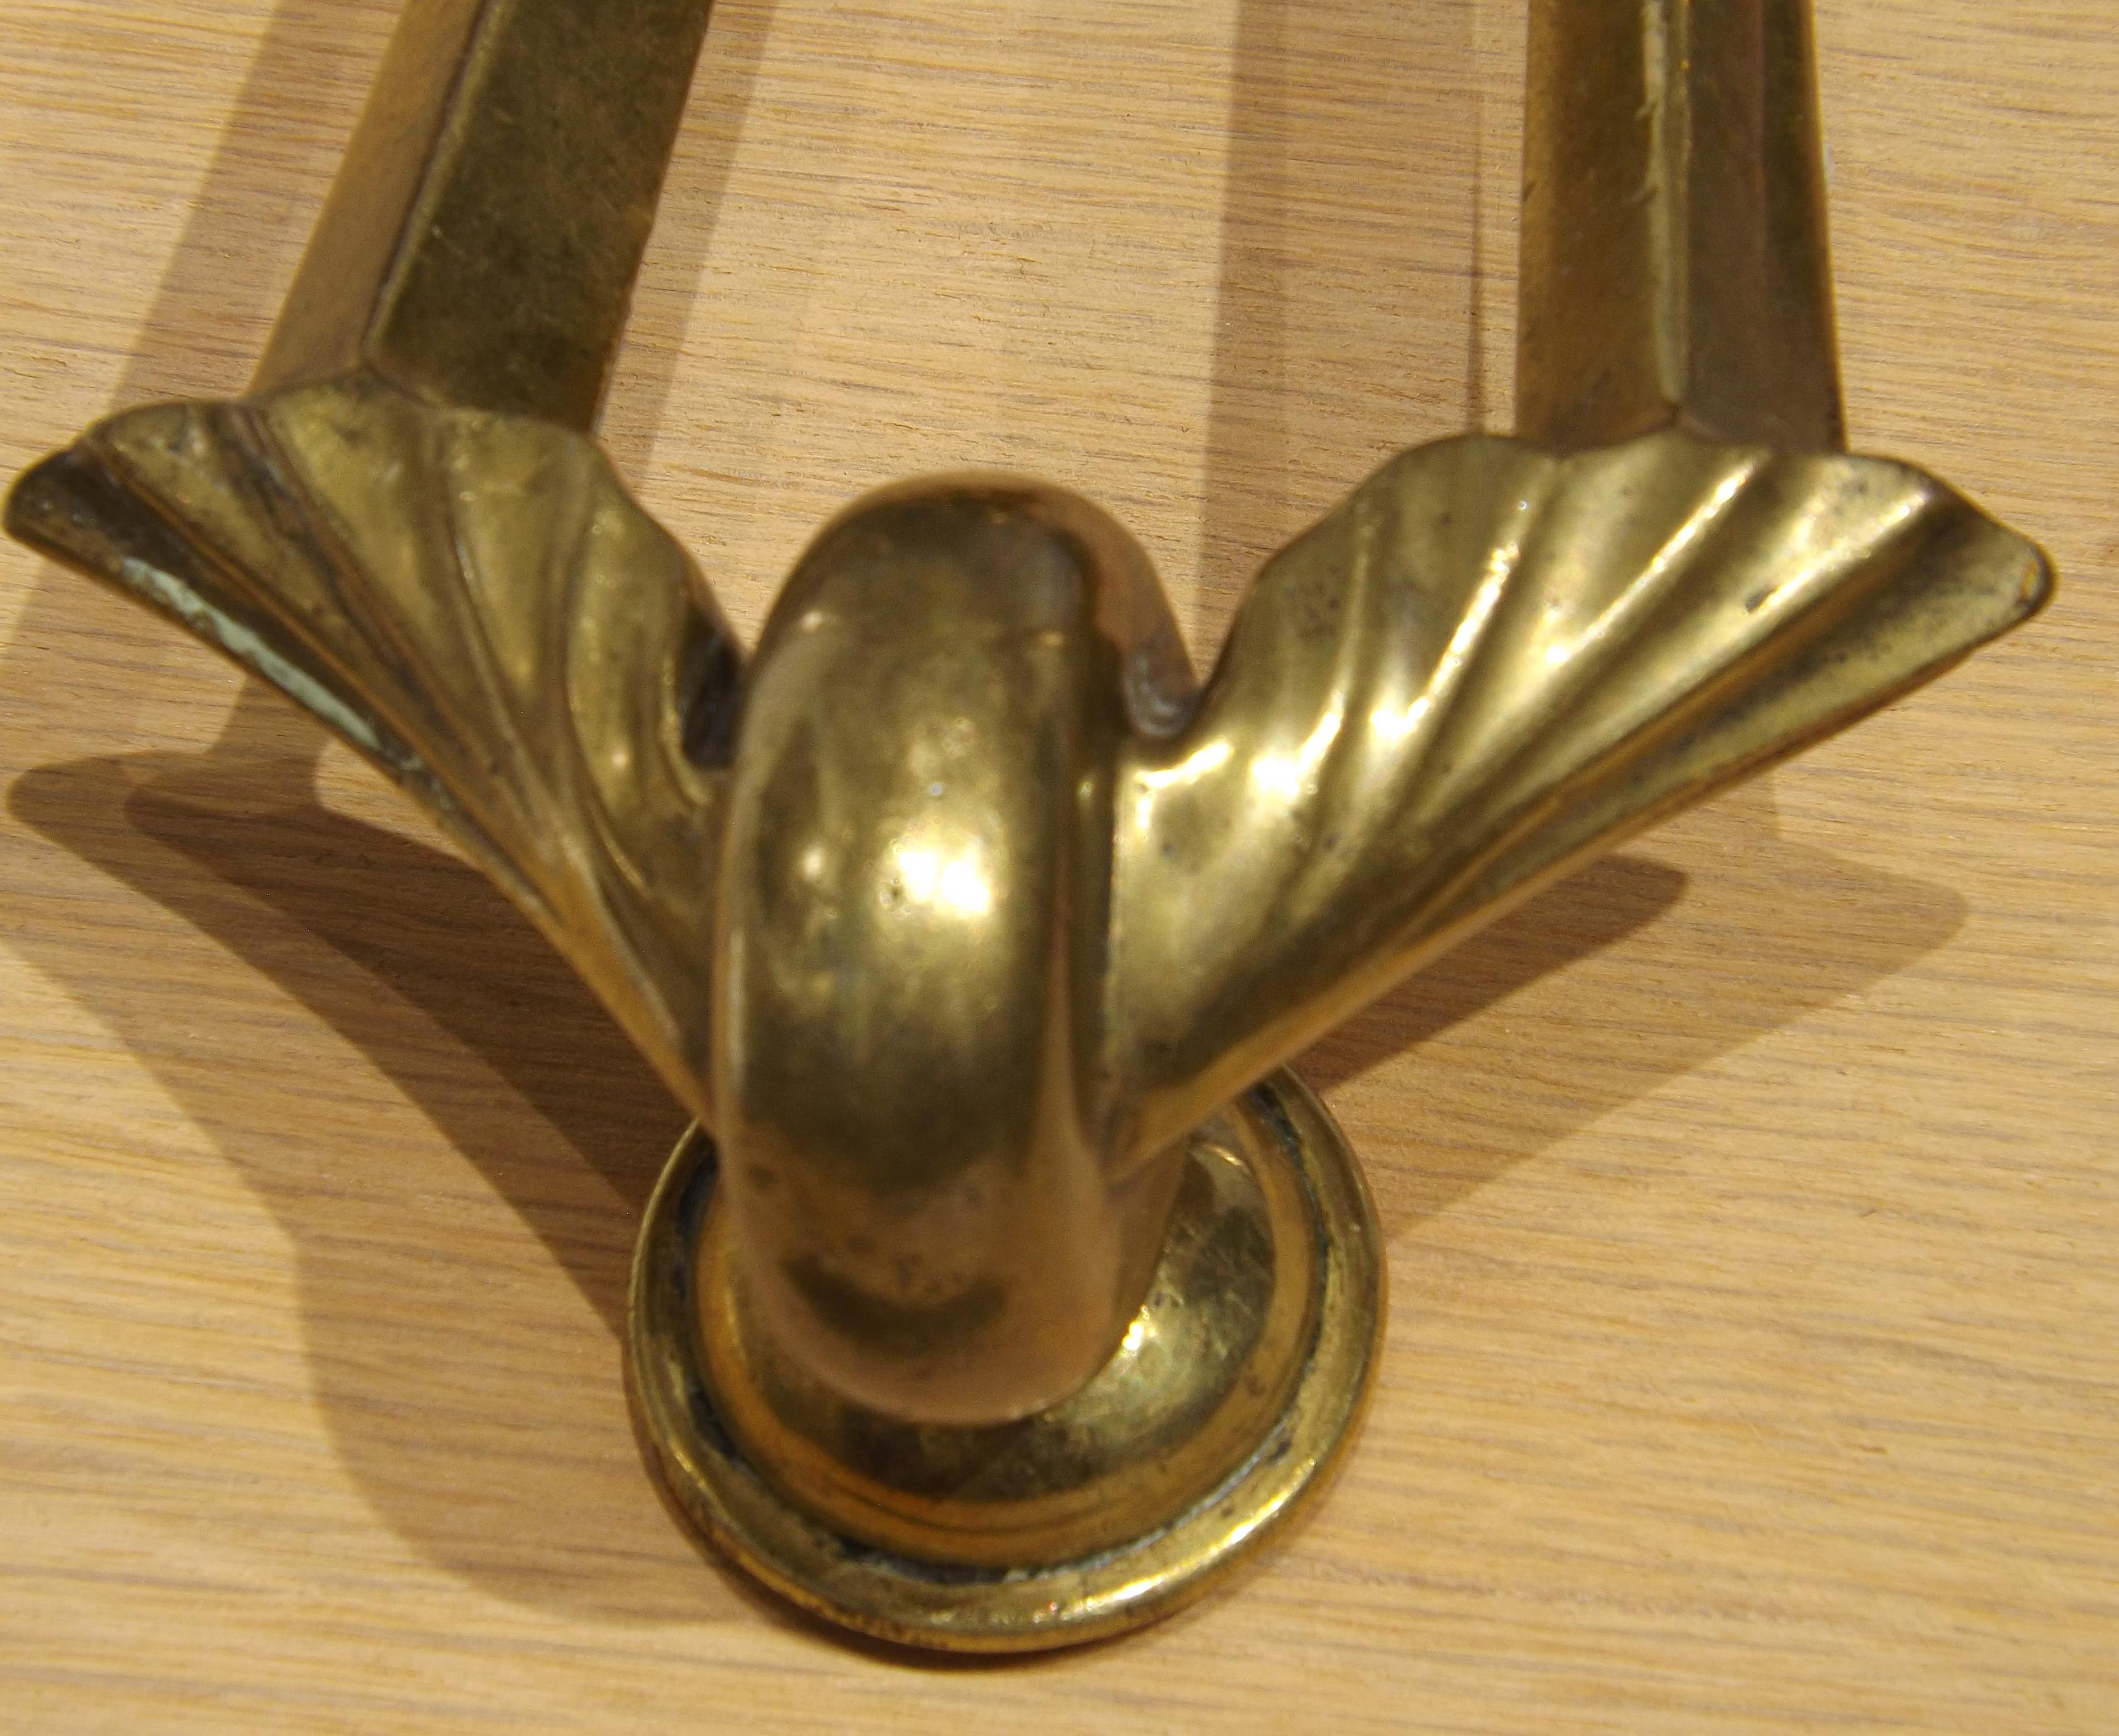 A magnificent brass door knocker in the shape of a winged wheel, from circa 1900. Designed to be mounted to a door, and complete with matching brass strike plate. Temporarily mounted to a wooden board for display purposes. When mounted on a door the